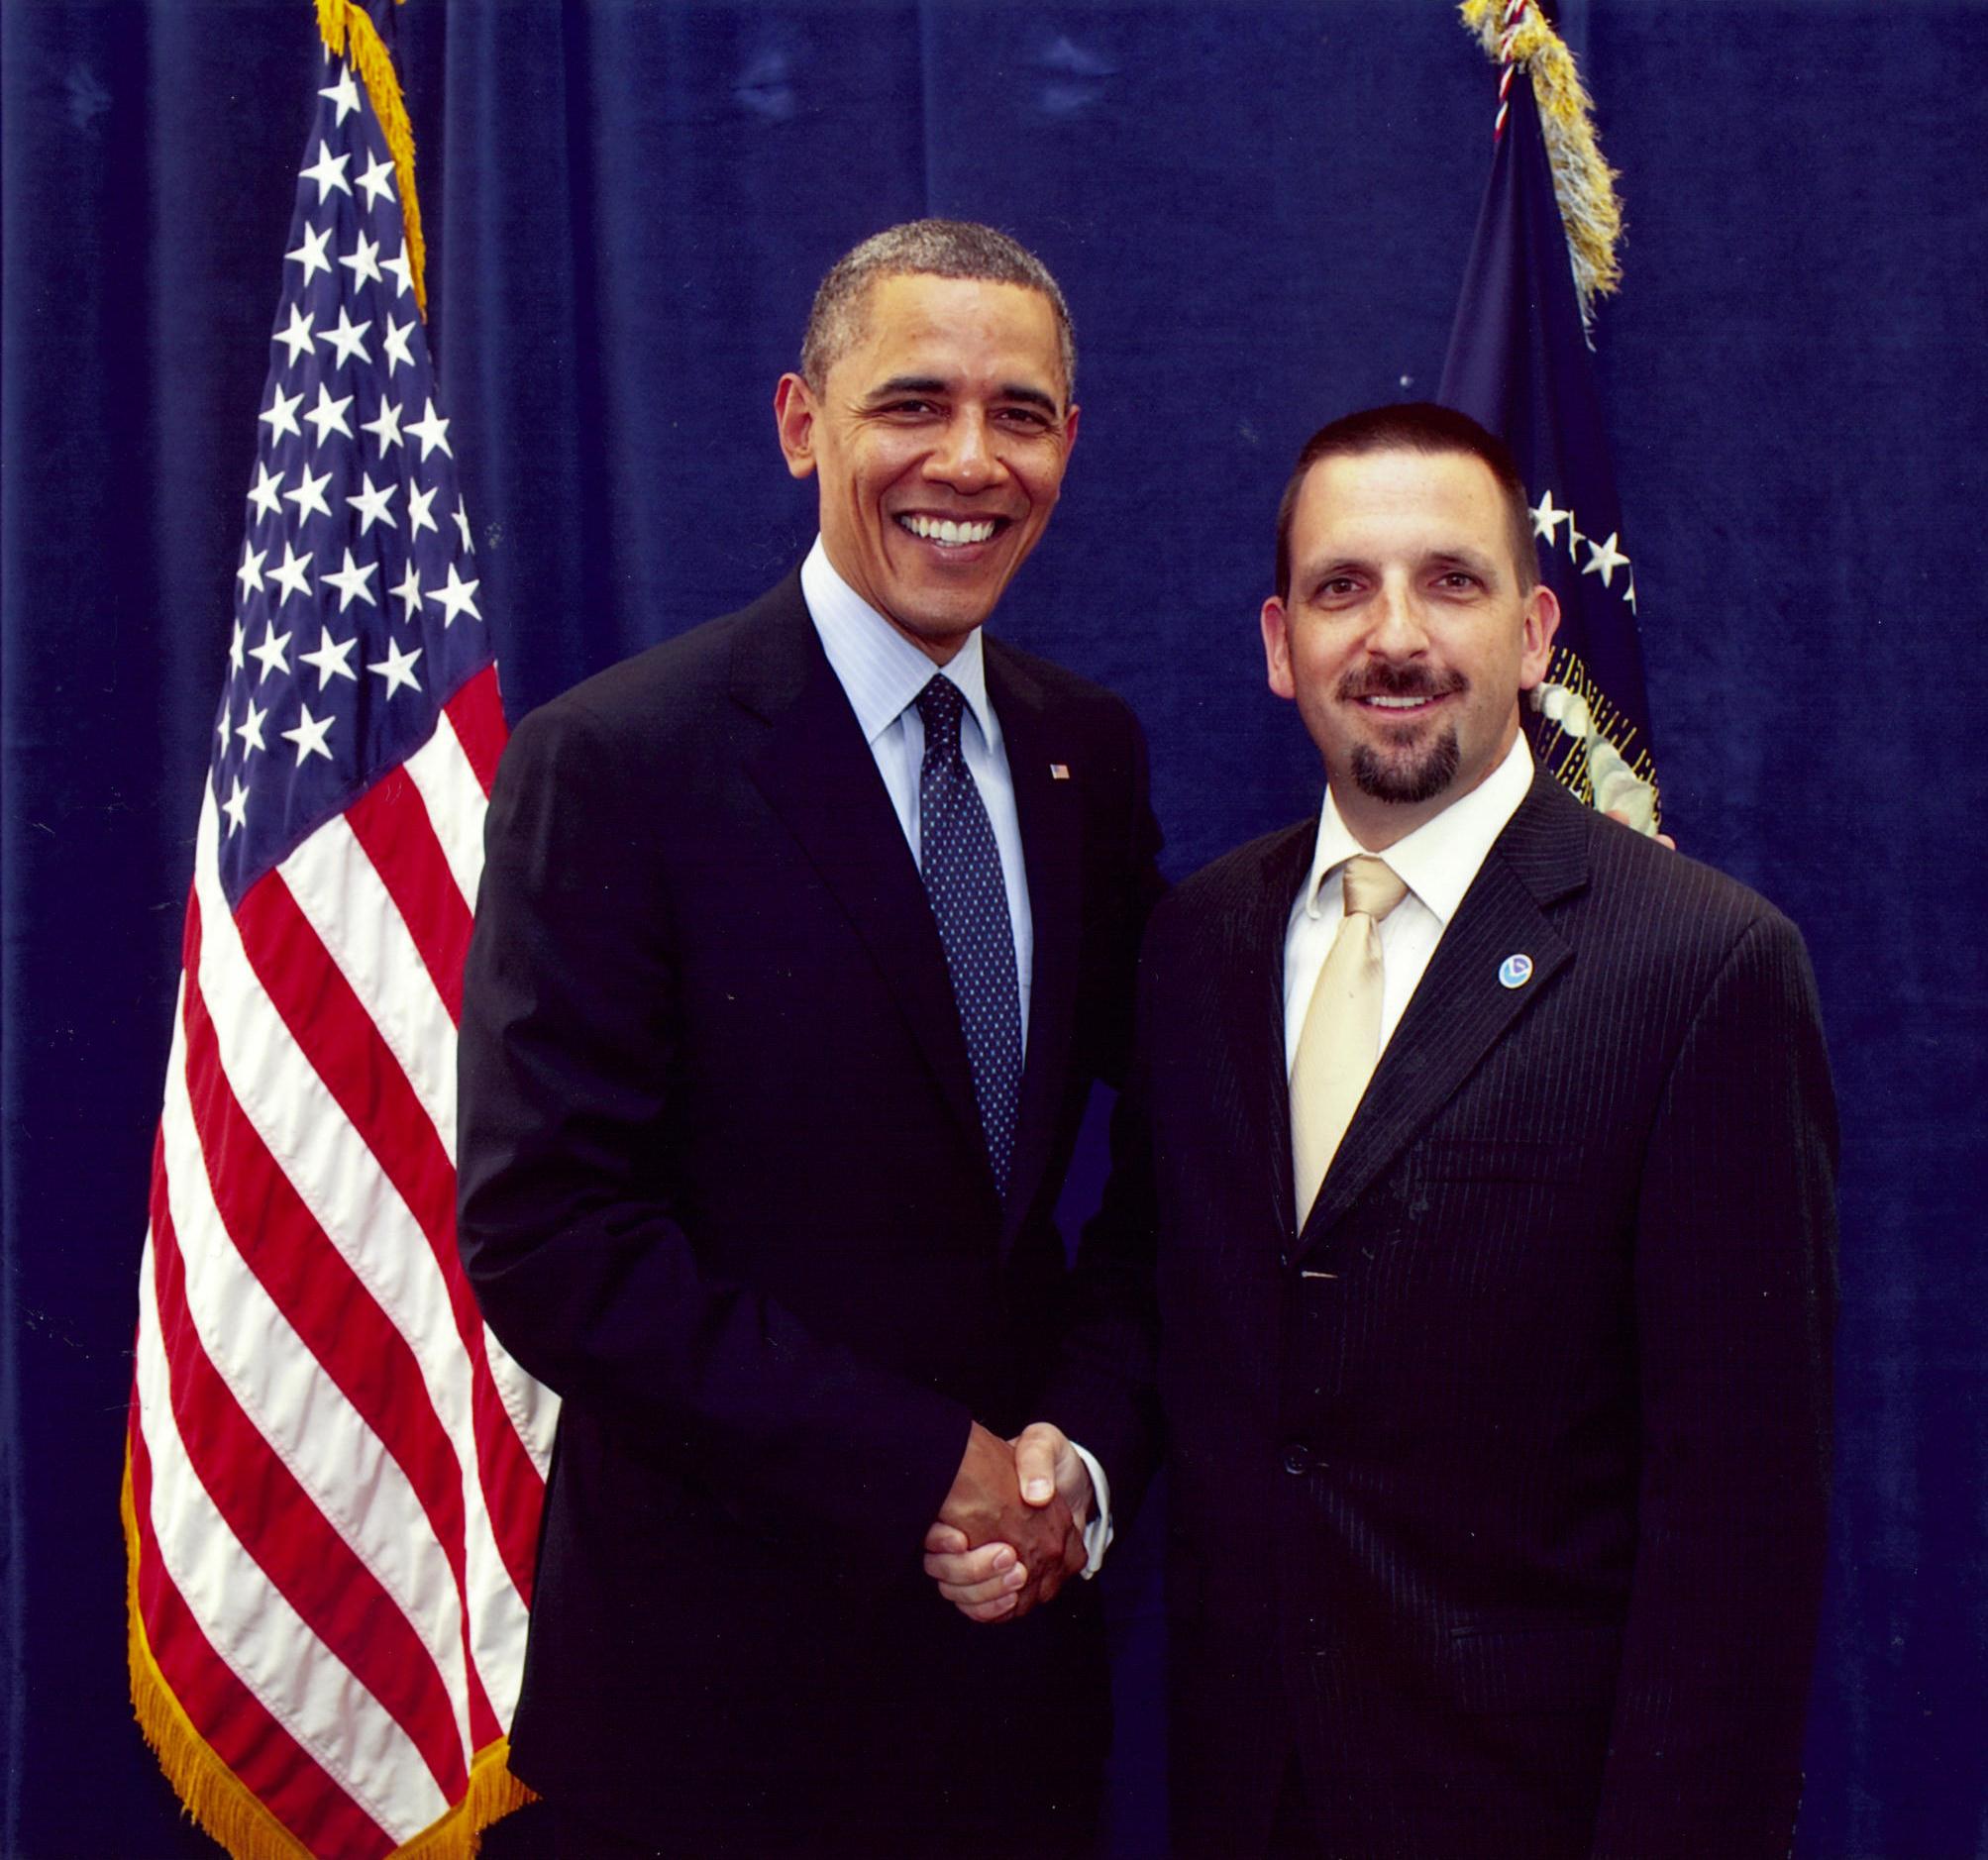 Two men shaking hands with an American flag in the background.